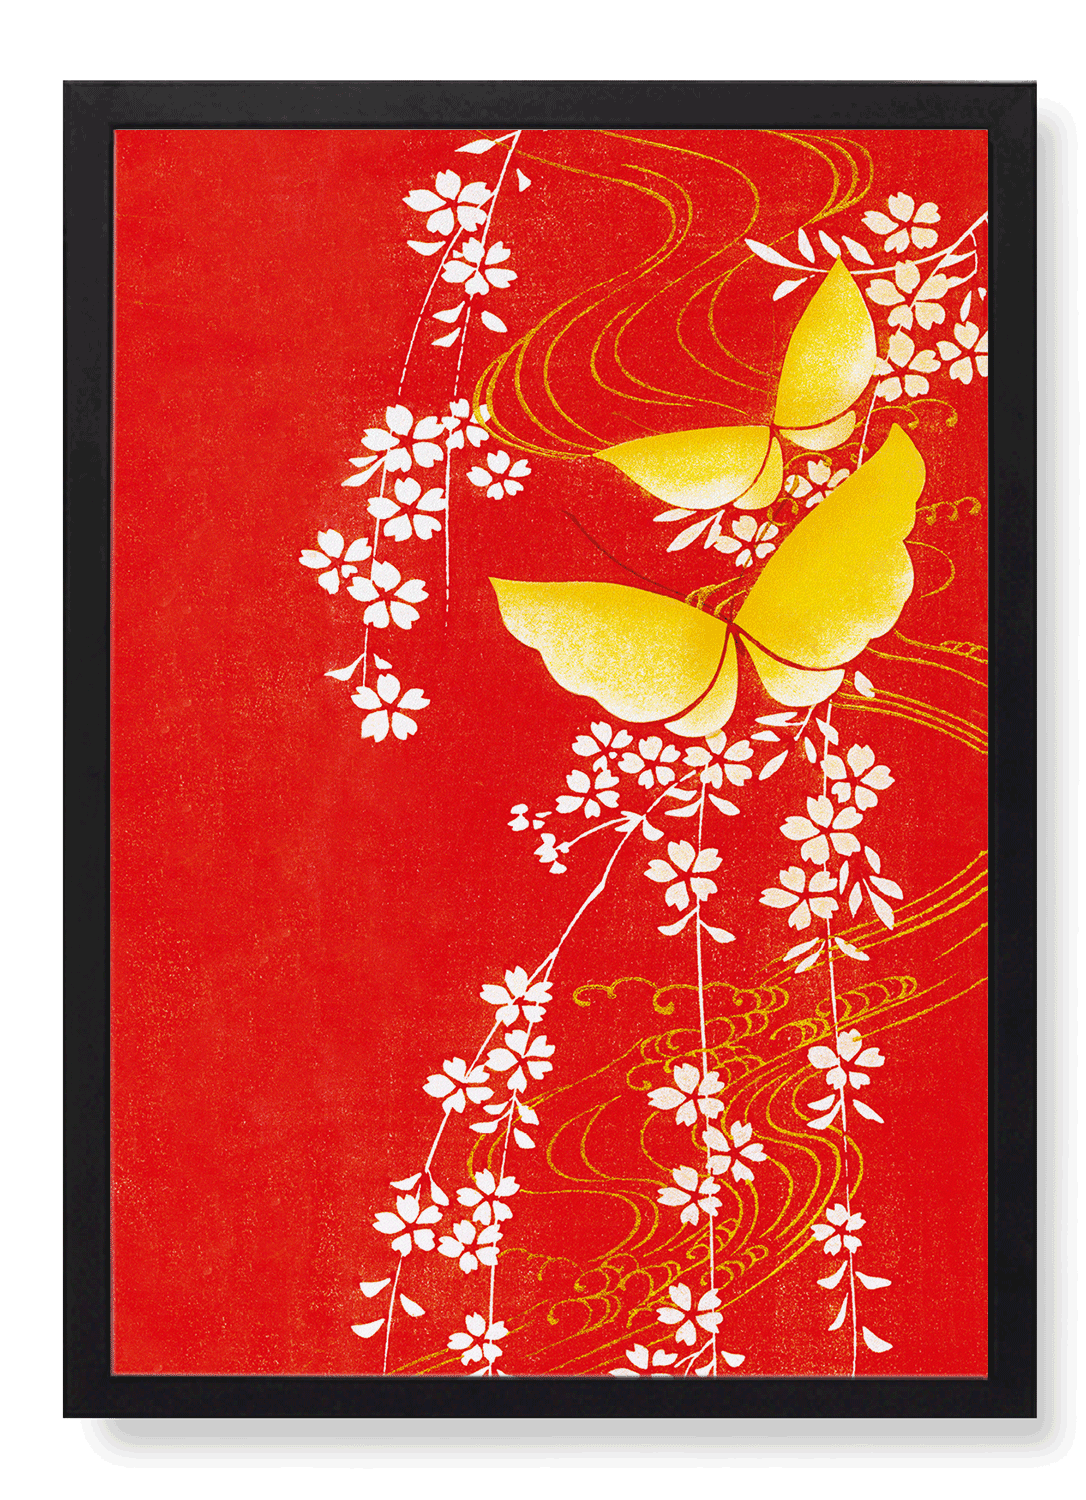 BUTTERFLIES AND CHERRY BLOSSOMS